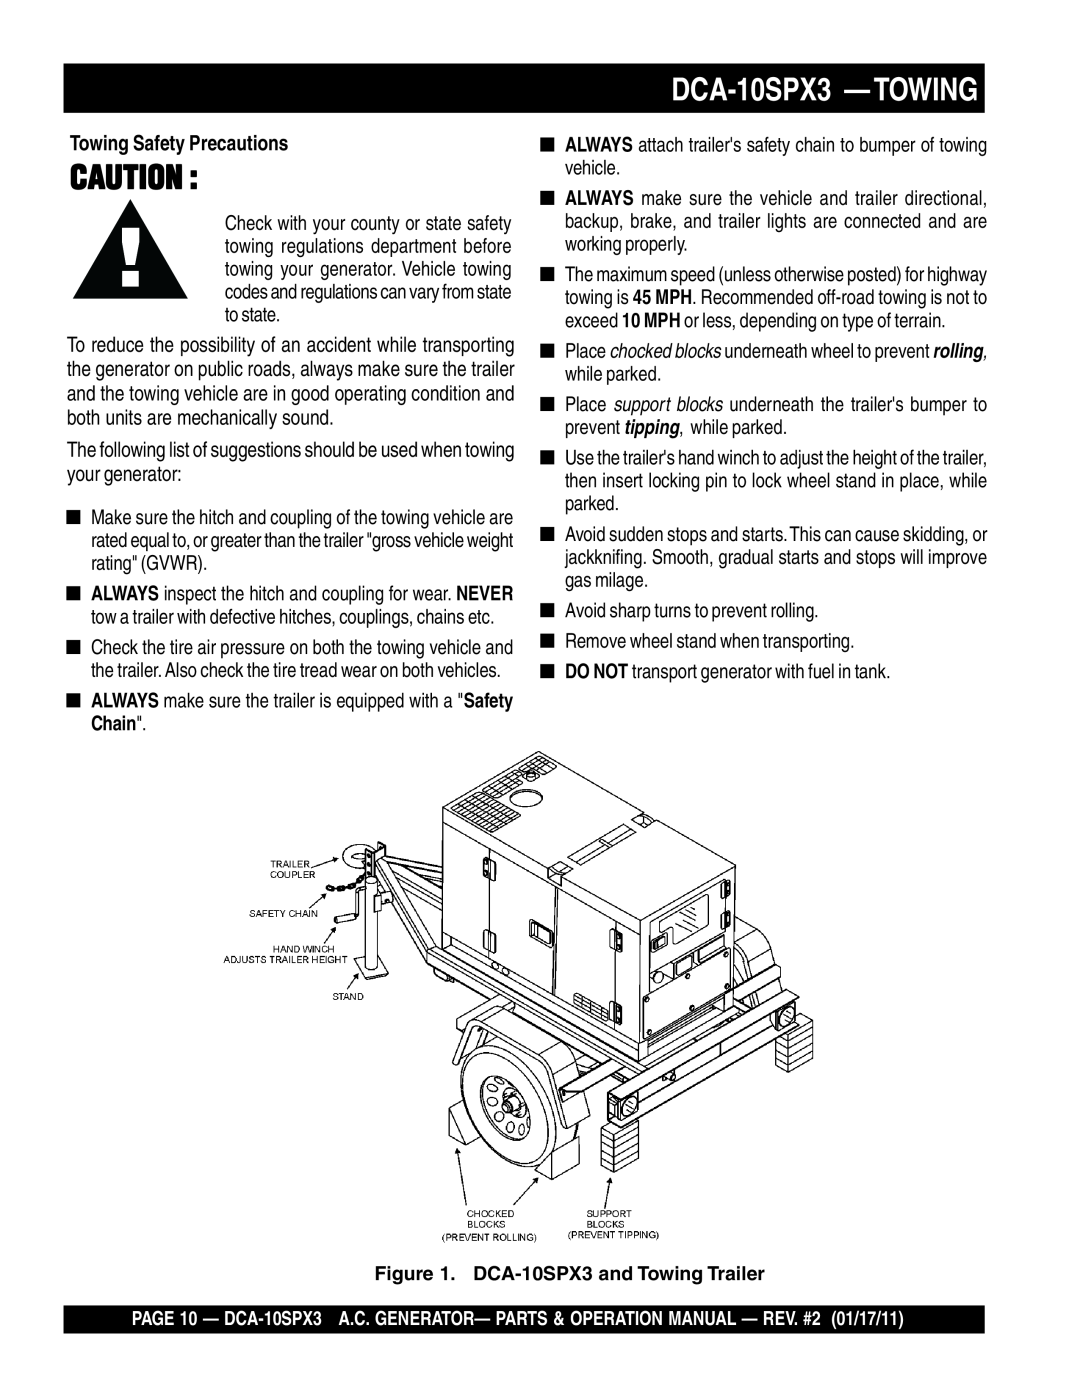 Multiquip DCA10SPX3 manual DCA-10SPX3 - TOWING, Towing Safety Precautions, DCA-10SPX3 and Towing Trailer 